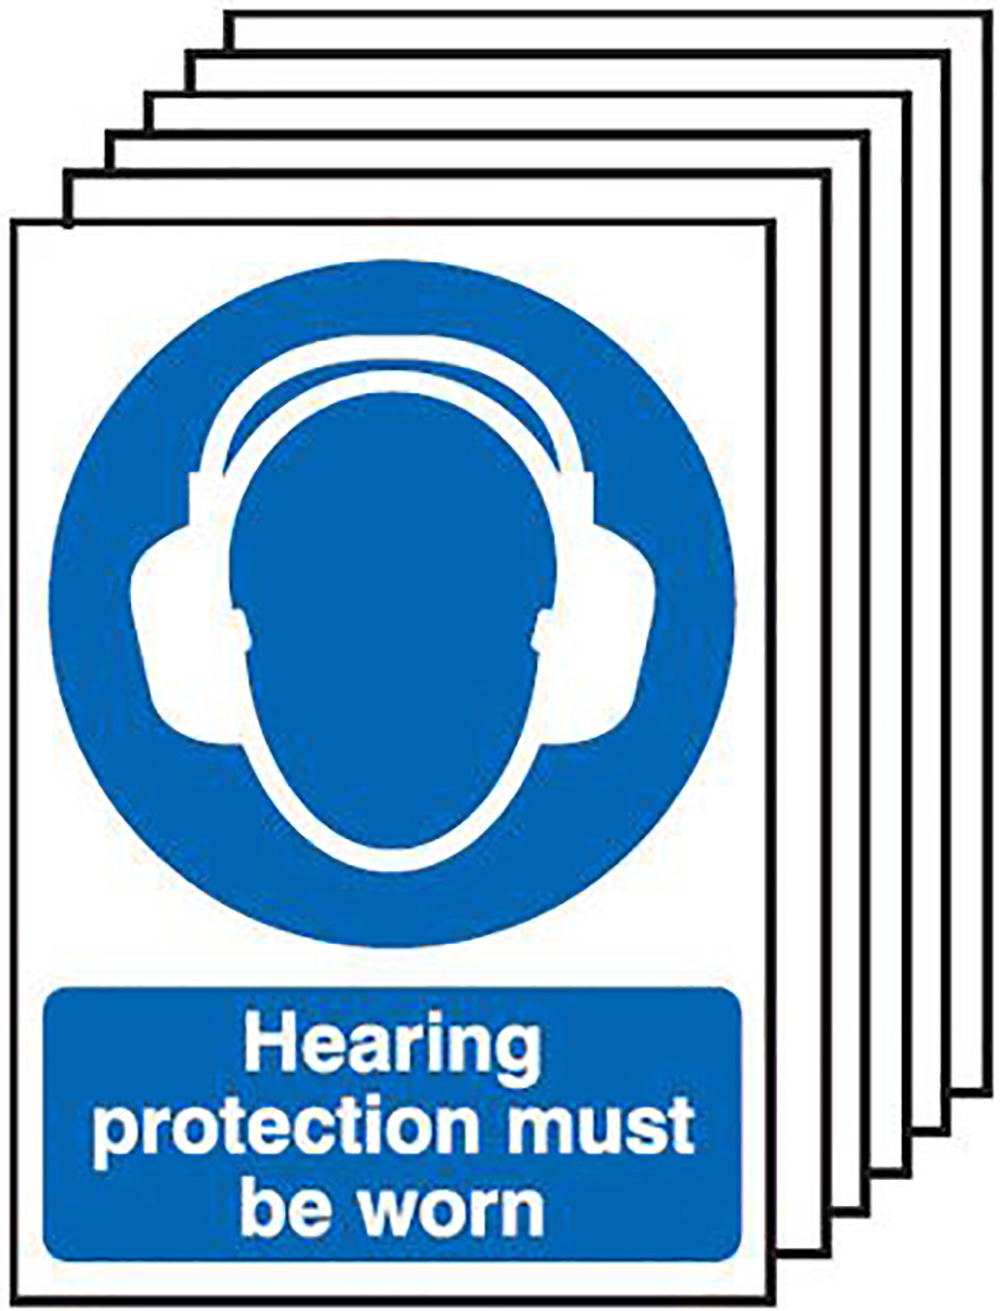 Hearing Protection Must Be Worn  297x210mm Self Adhesive Vinyl Safety Sign Pack of 6 